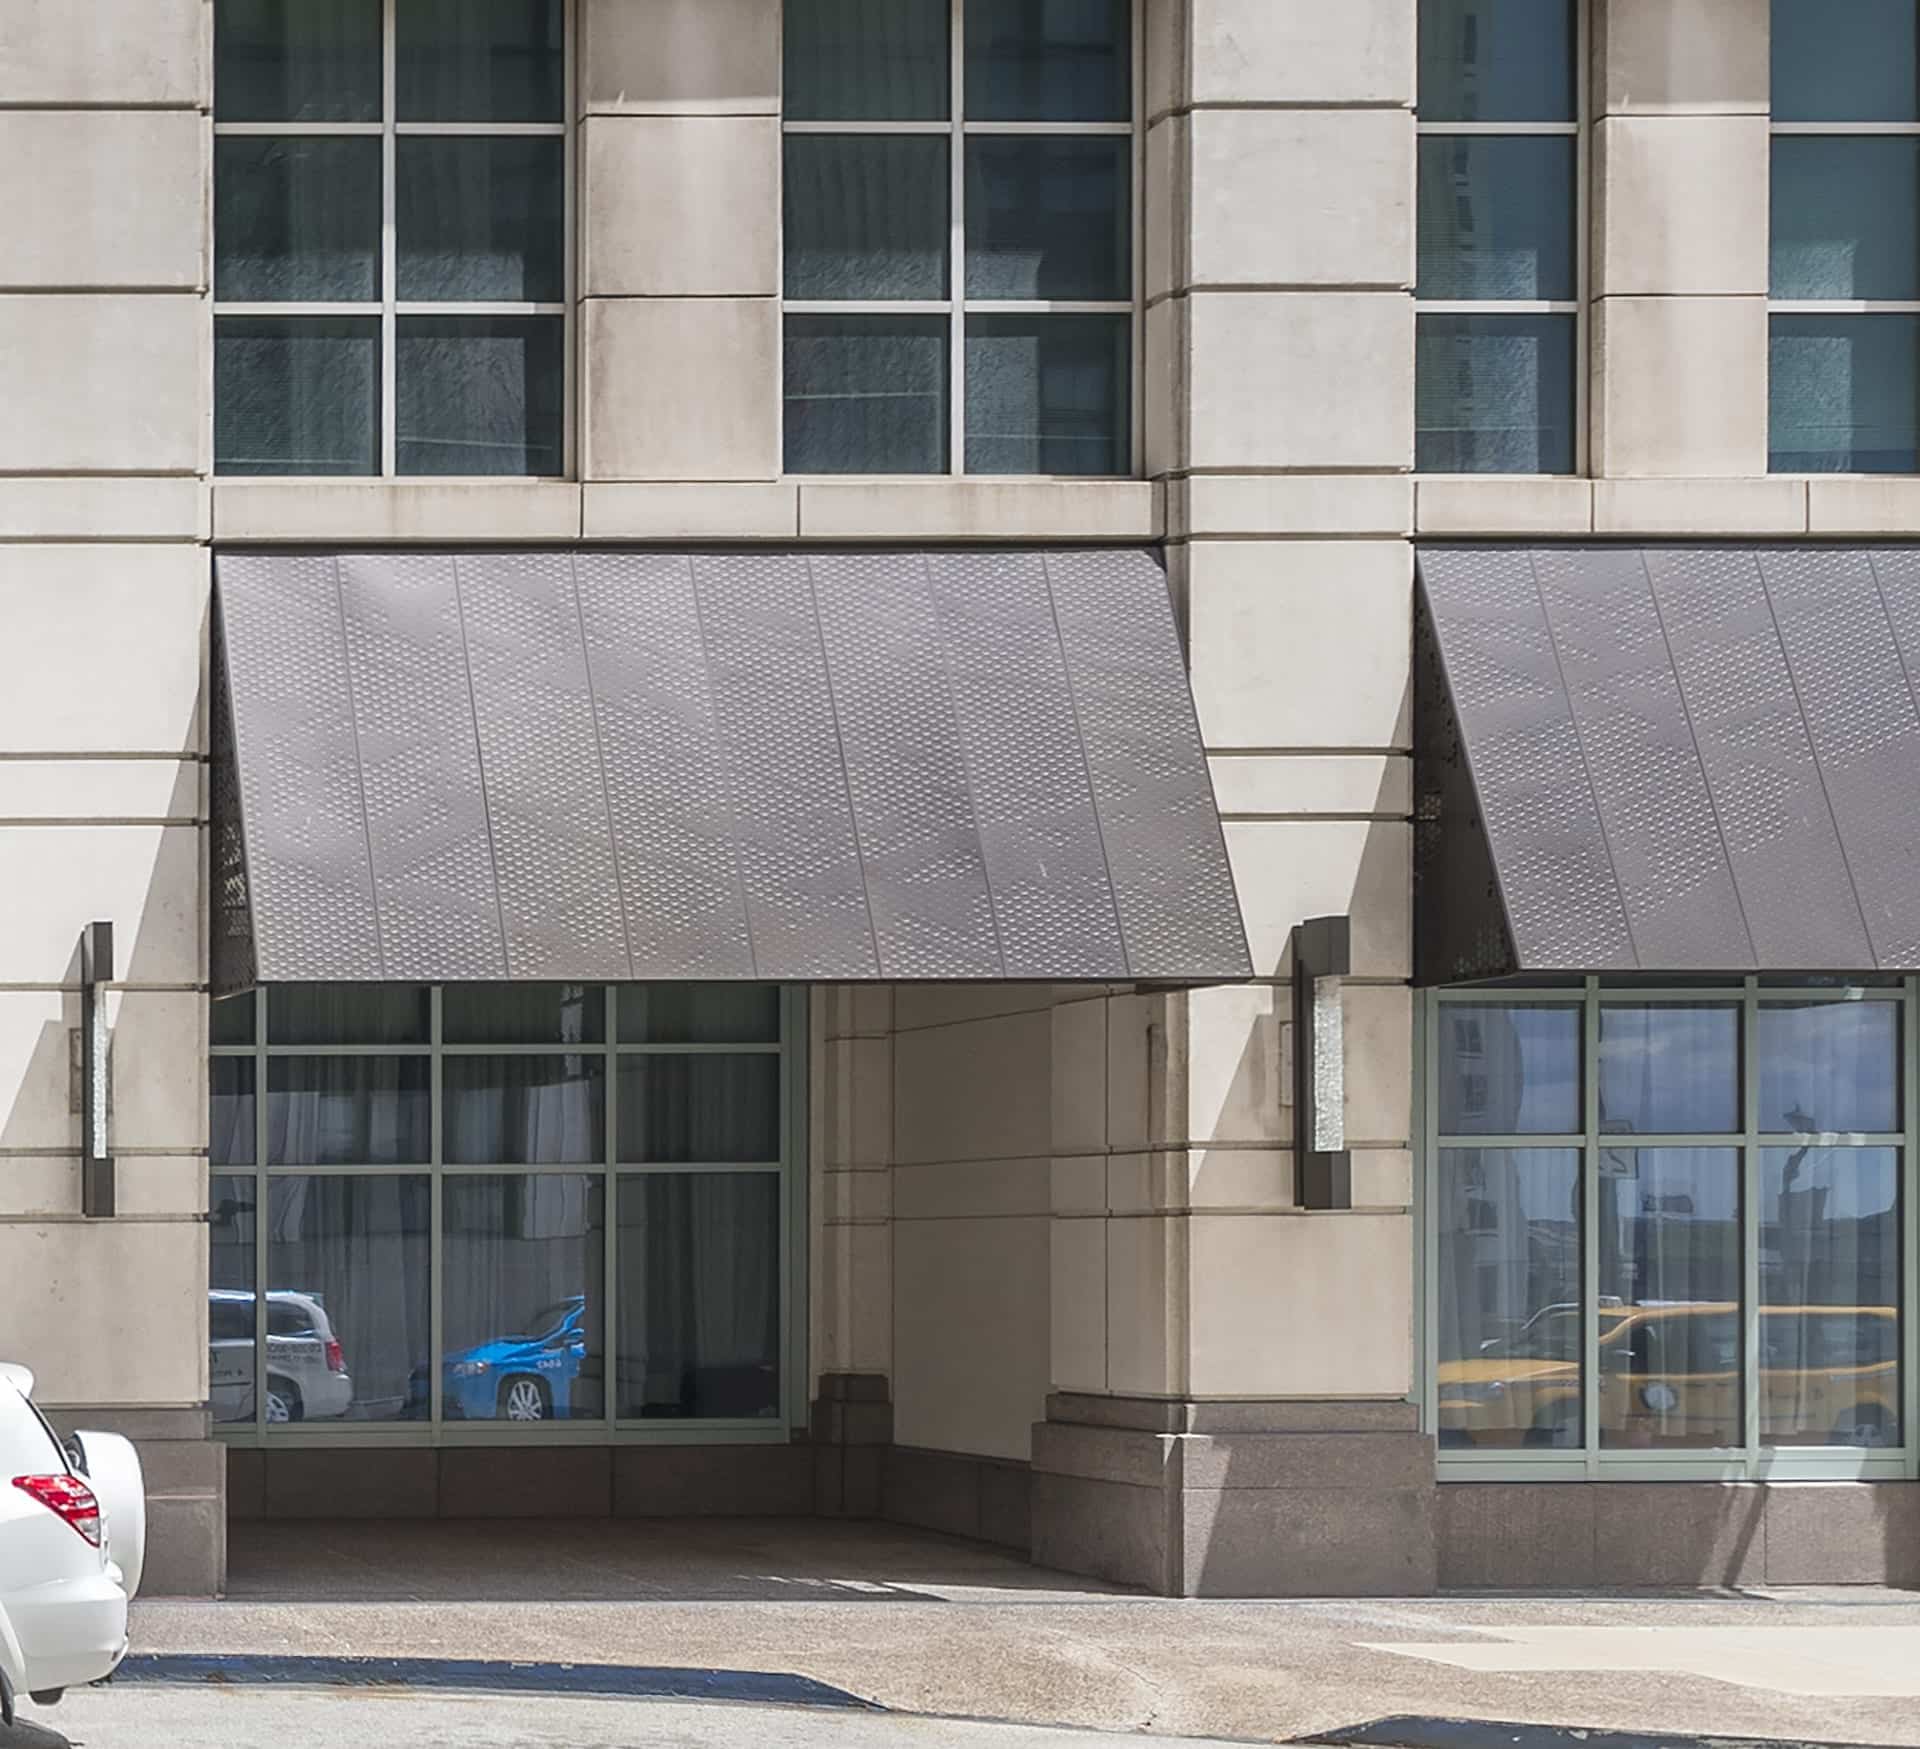 Anodized aluminum panels and structure for a series of awnings. Raised circles on the front create a pattern while still protecting from the elements.